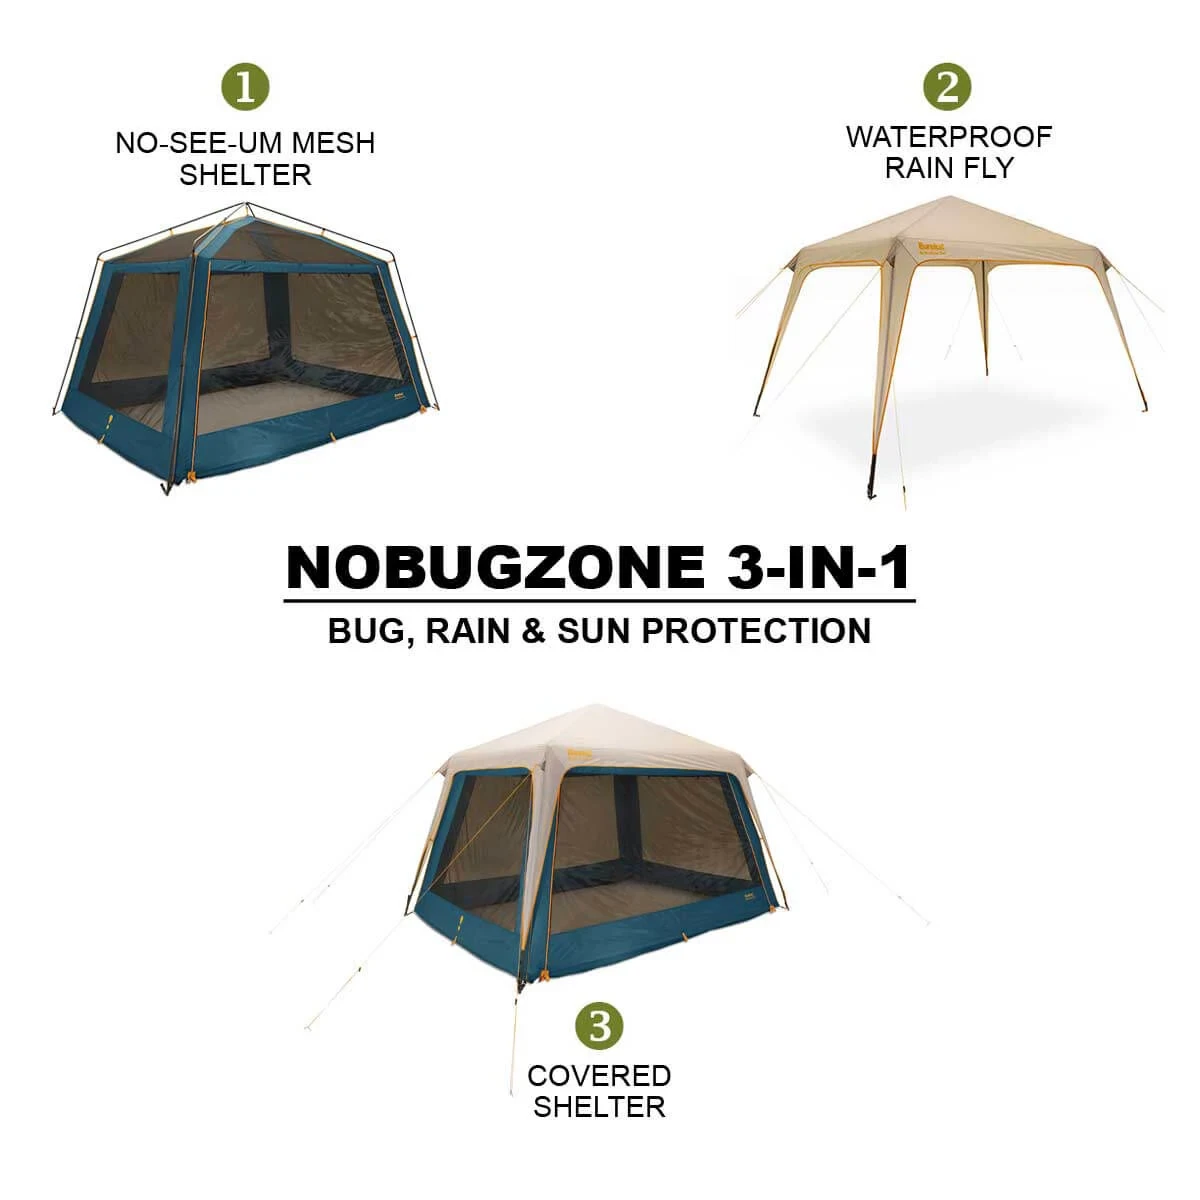 NoBugZone 3-in-1 screen house 3 set up options